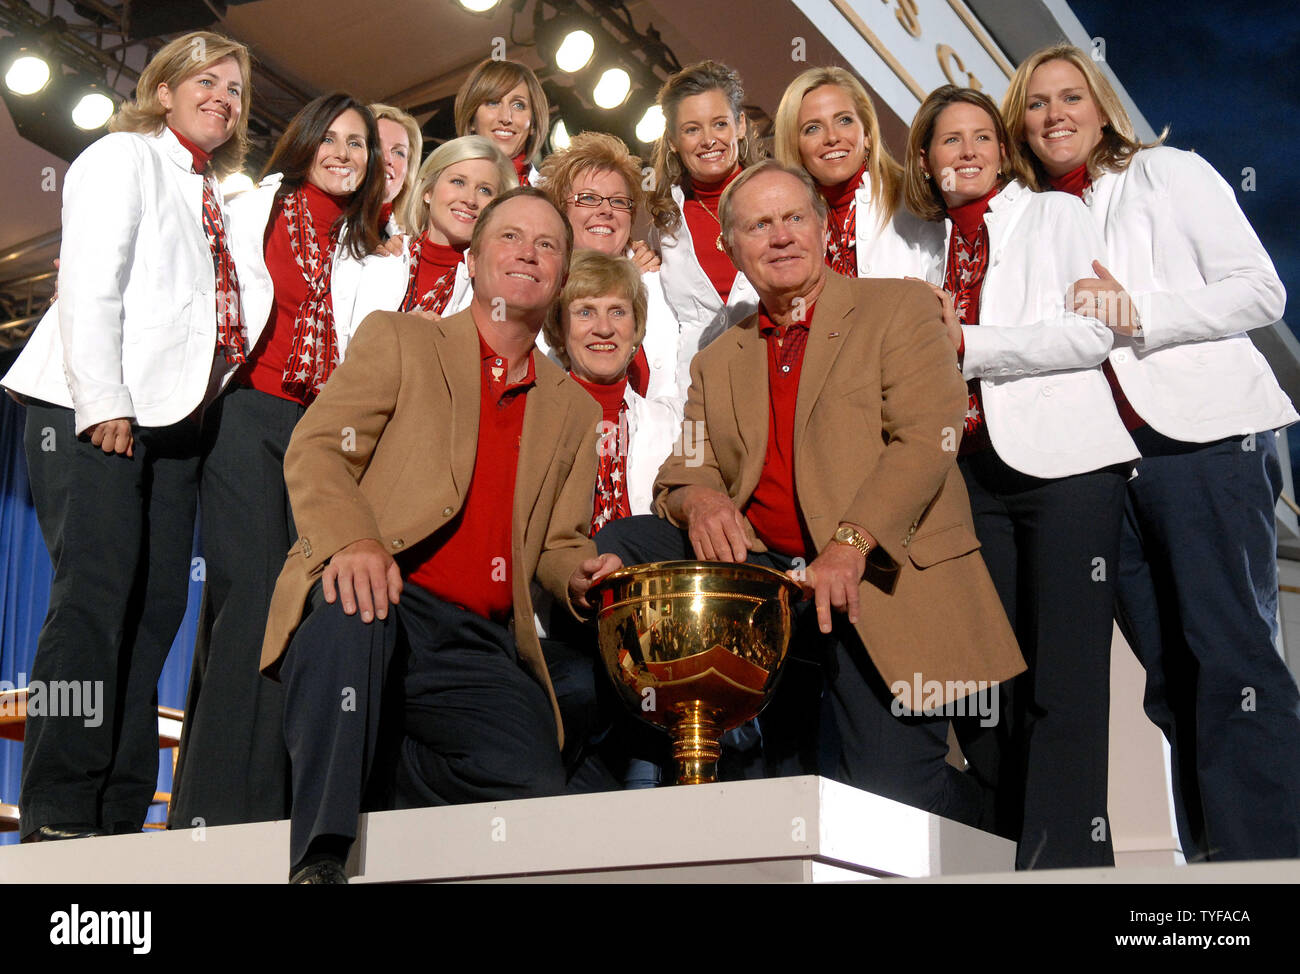 U.S. Team captain Jack Nicklaus (R) and Assistant Team Captain Jeff Sluman joined by the team's wives poses with the The Presidents Cup after the U.S. Team defeated the International Team 19.5 to 14.5 at The Royal Montreal Golf Club in Montreal on September 30, 2007. (UPI Photo/Kevin Dietsch) Stock Photo